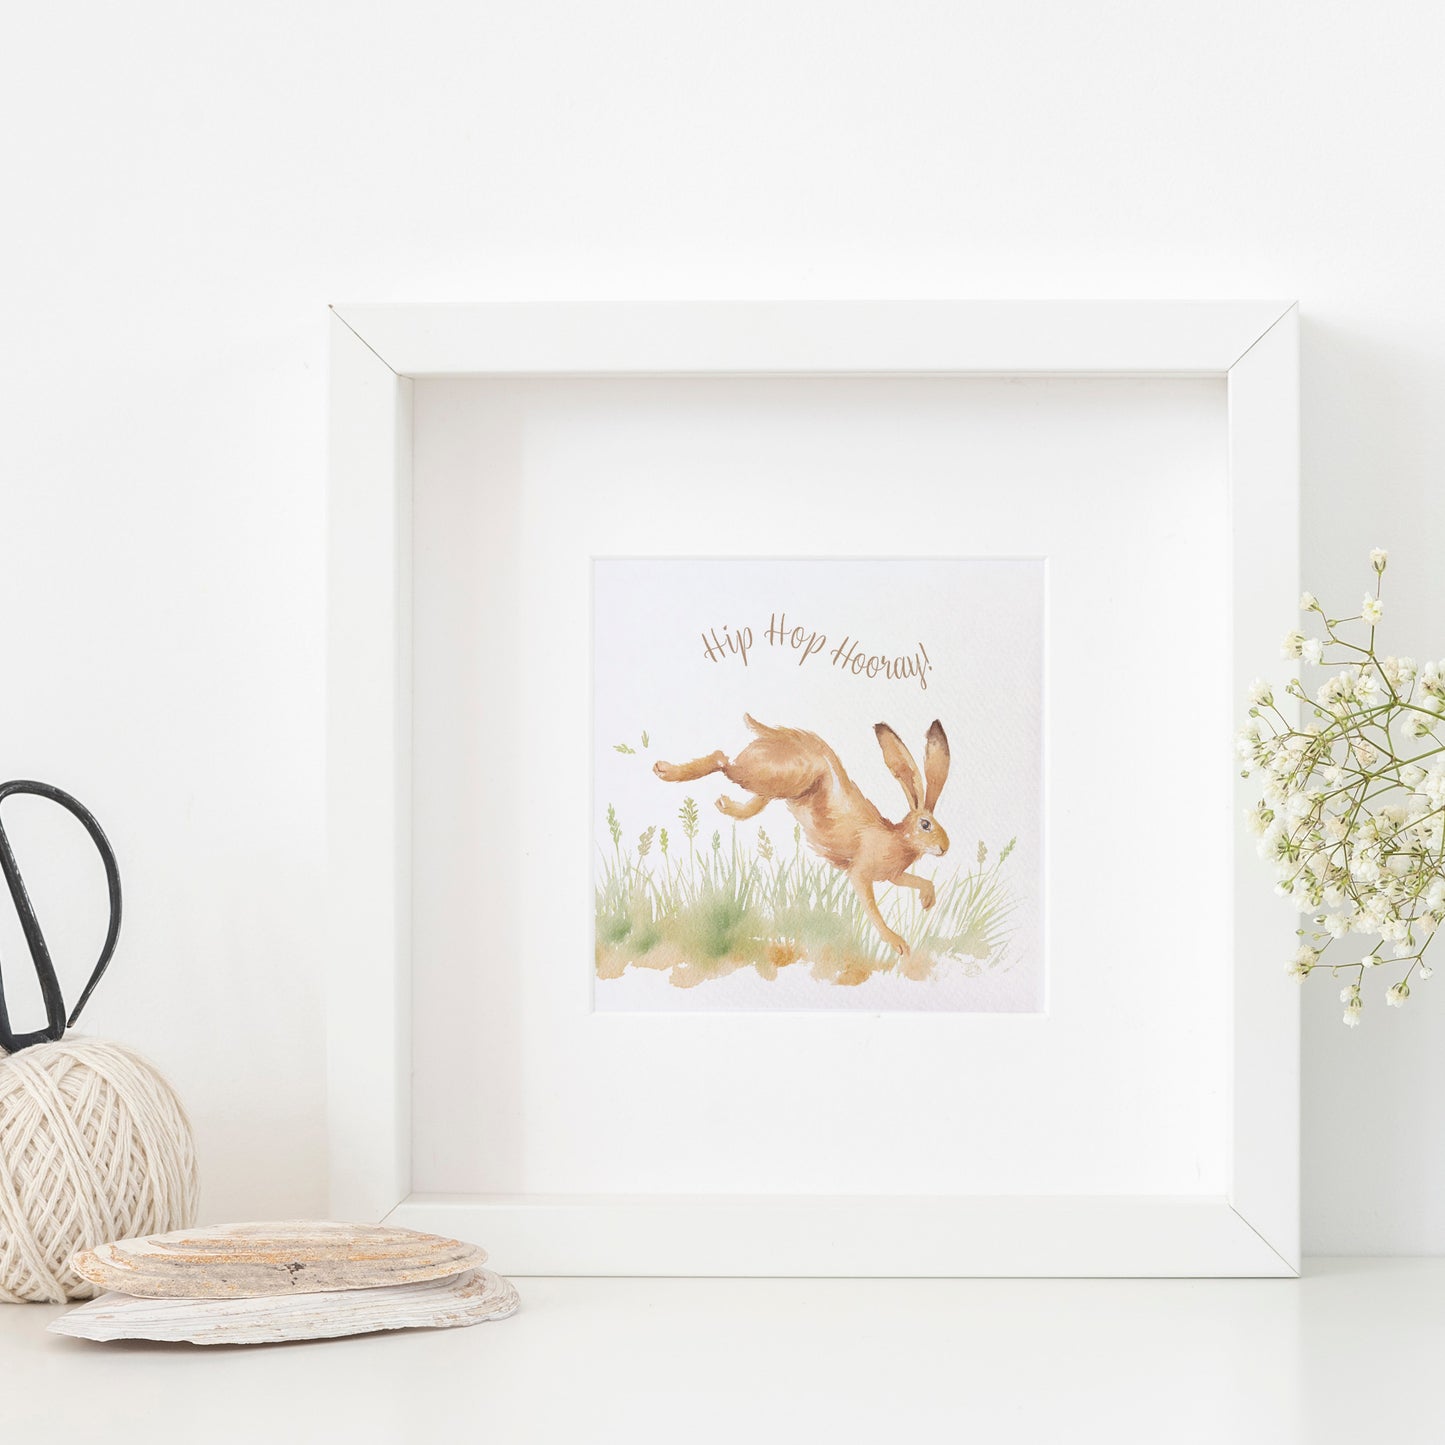 A greetings card displayed as an art print in a white frame propped up on a shelf next to a plant. The card reads Hip Hop Hooray in brown text above a leaping hare in a watercolour style.